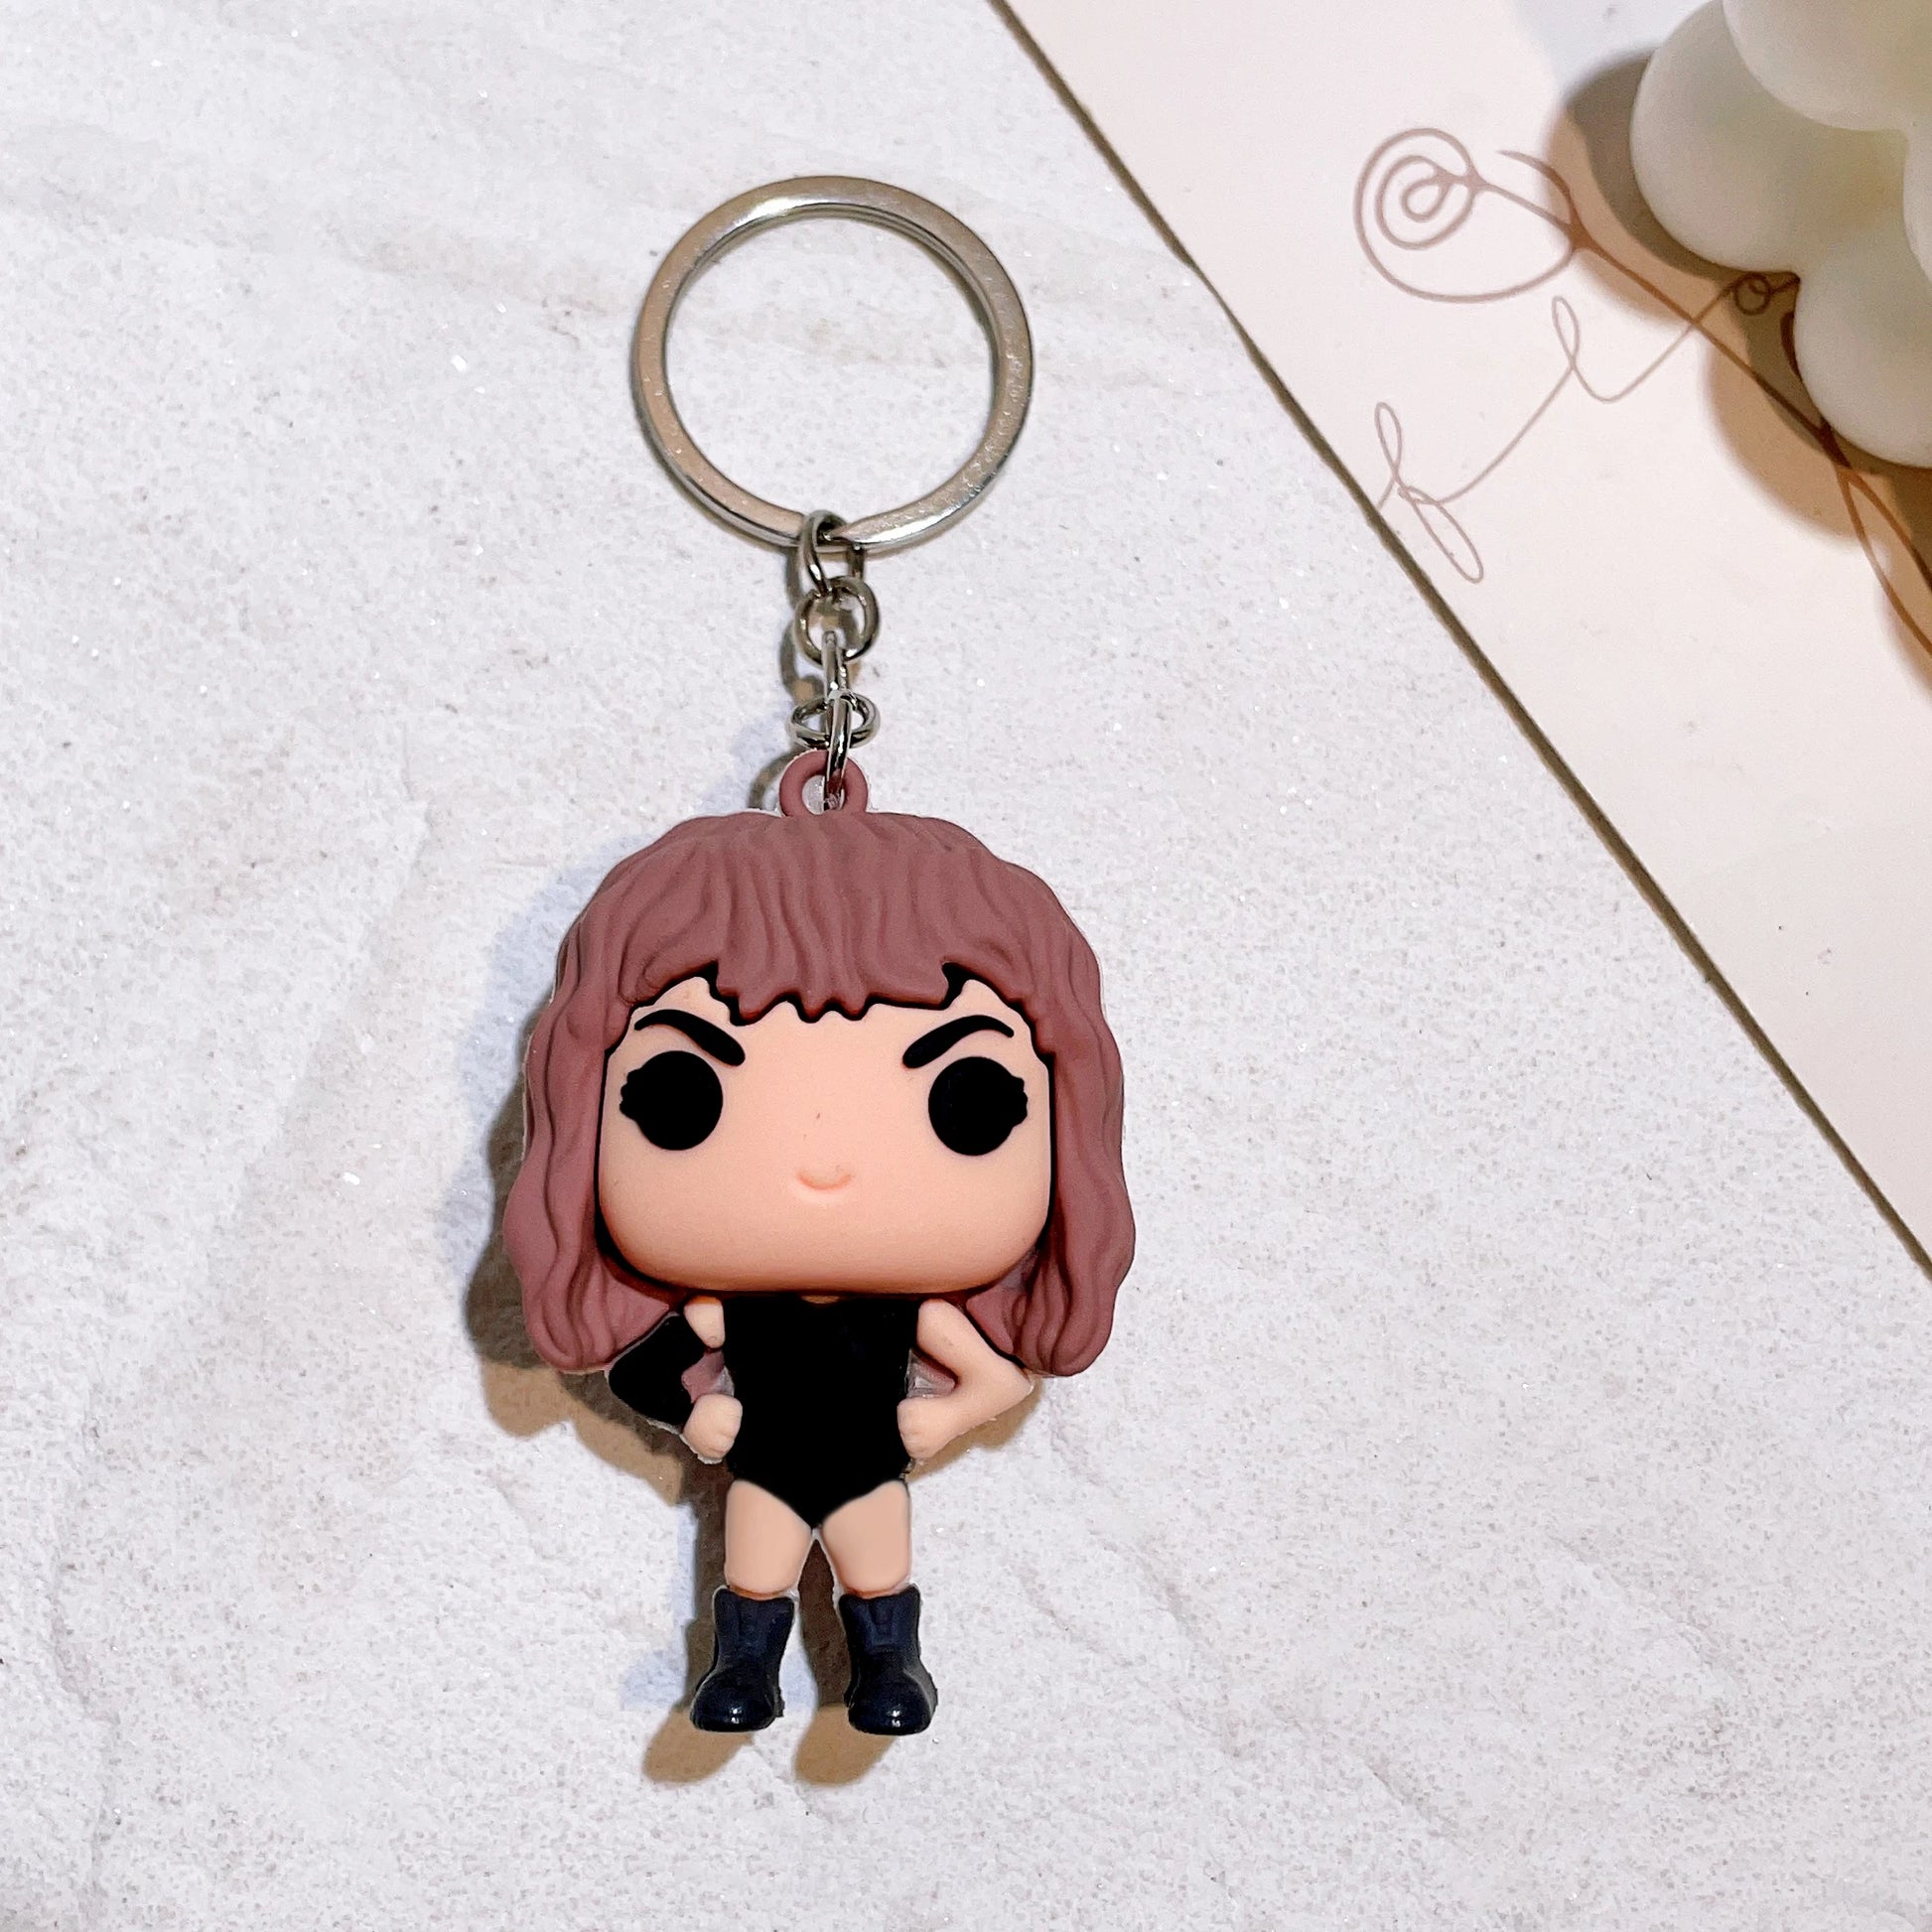 Singer Swift the Taylor Keychain Kawaii Taylor Guitar Music Notation Keyring Car Key Holder for Party Accessories Gifts 1 - ihavepaws.com